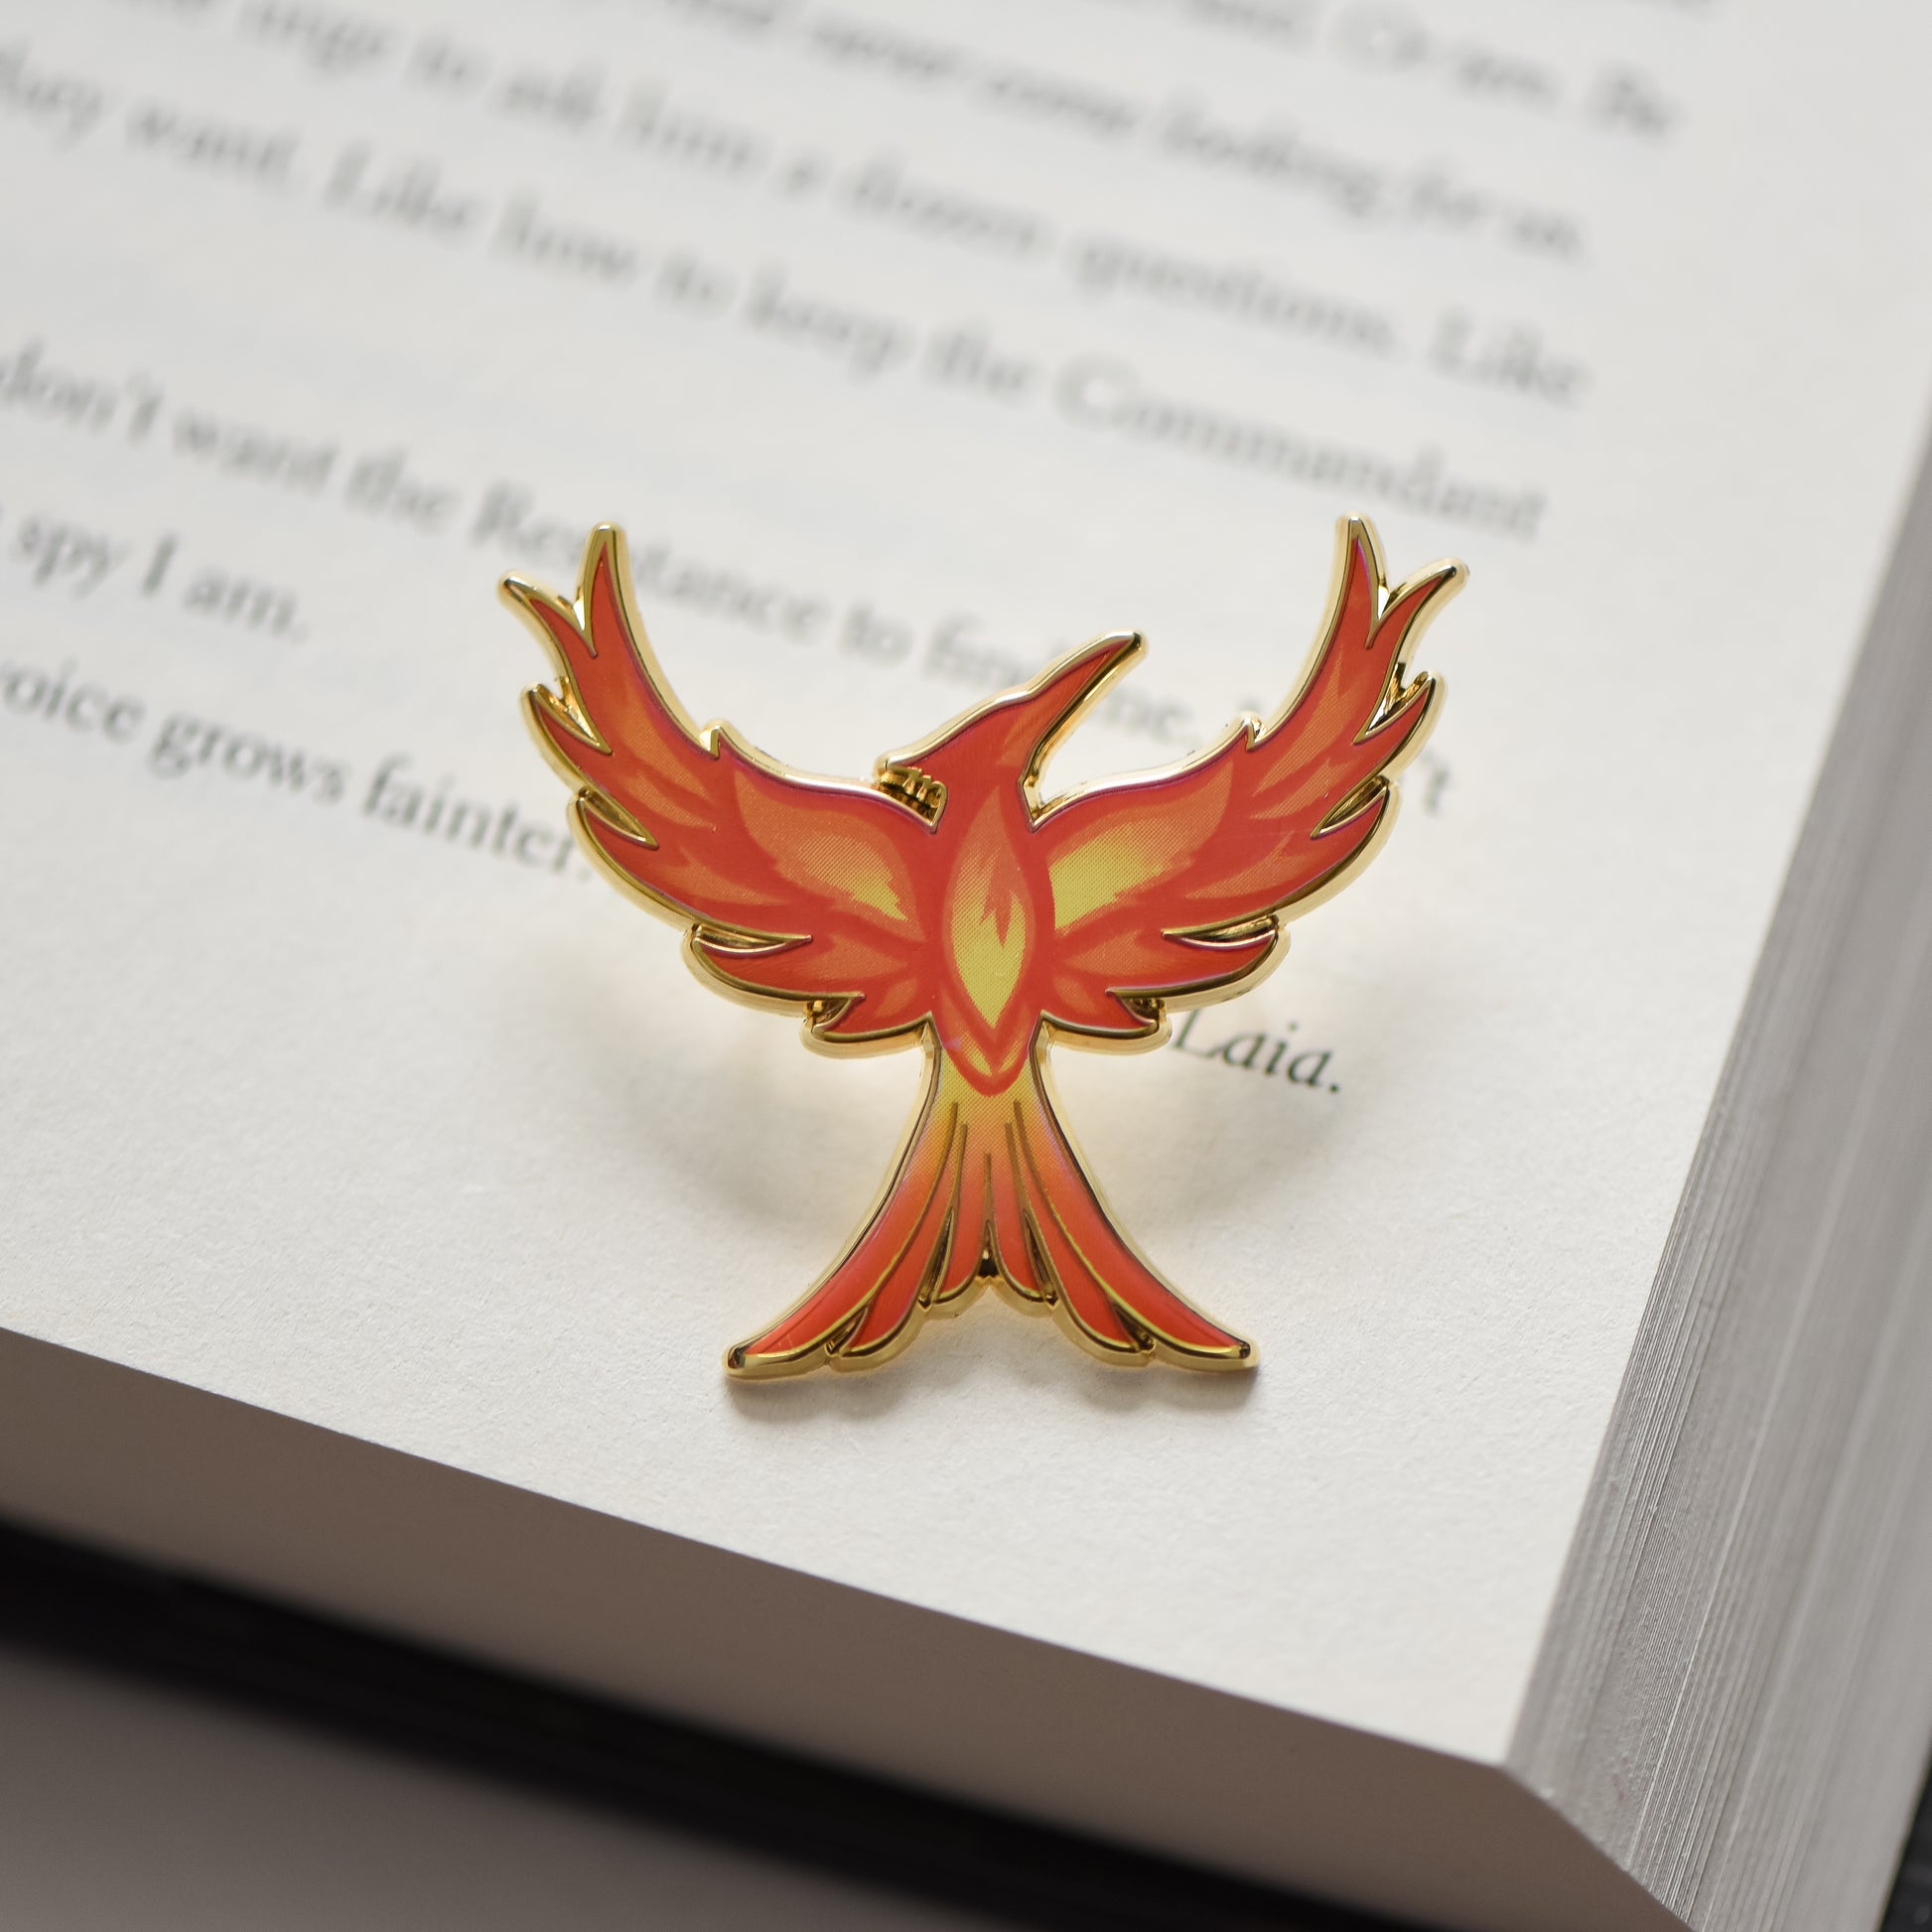 Mockingjay with red orange and yellow flame details enamel pin sitting on a book